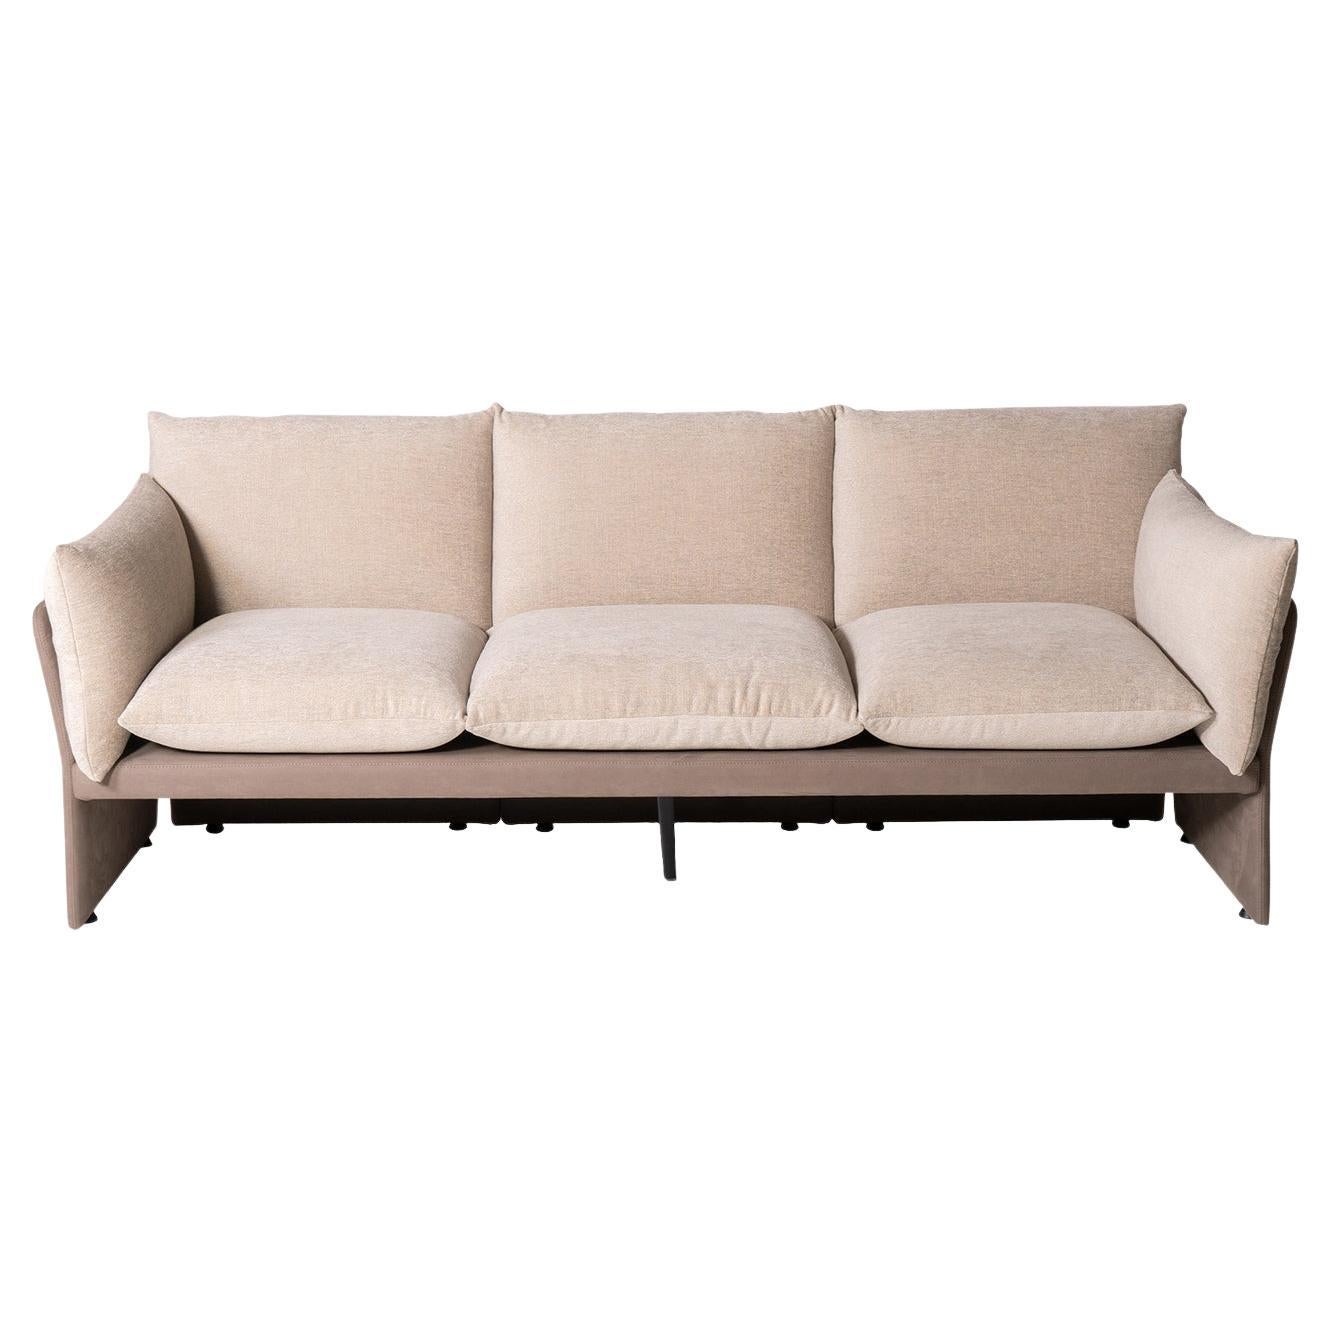 Farfalle 3-Seater Sofa By Marco And Giulio Mantellassi